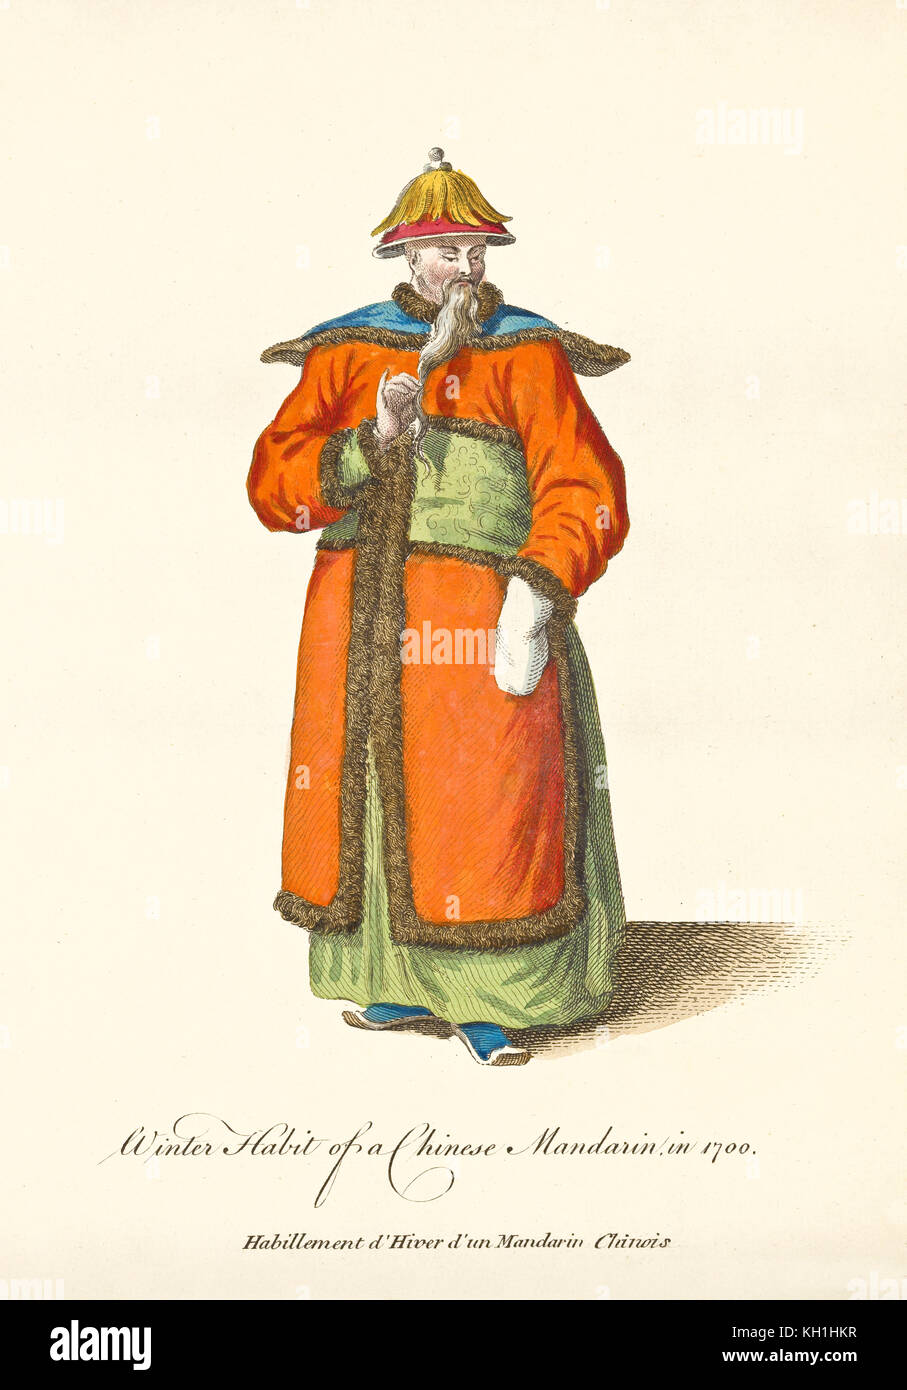 Chinese Mandarin in traditional winter dresses in 1700. Long fur clothes. Old illustration by J.M. Vien, publ. T. Jefferys, London, 1757-1772 Stock Photo